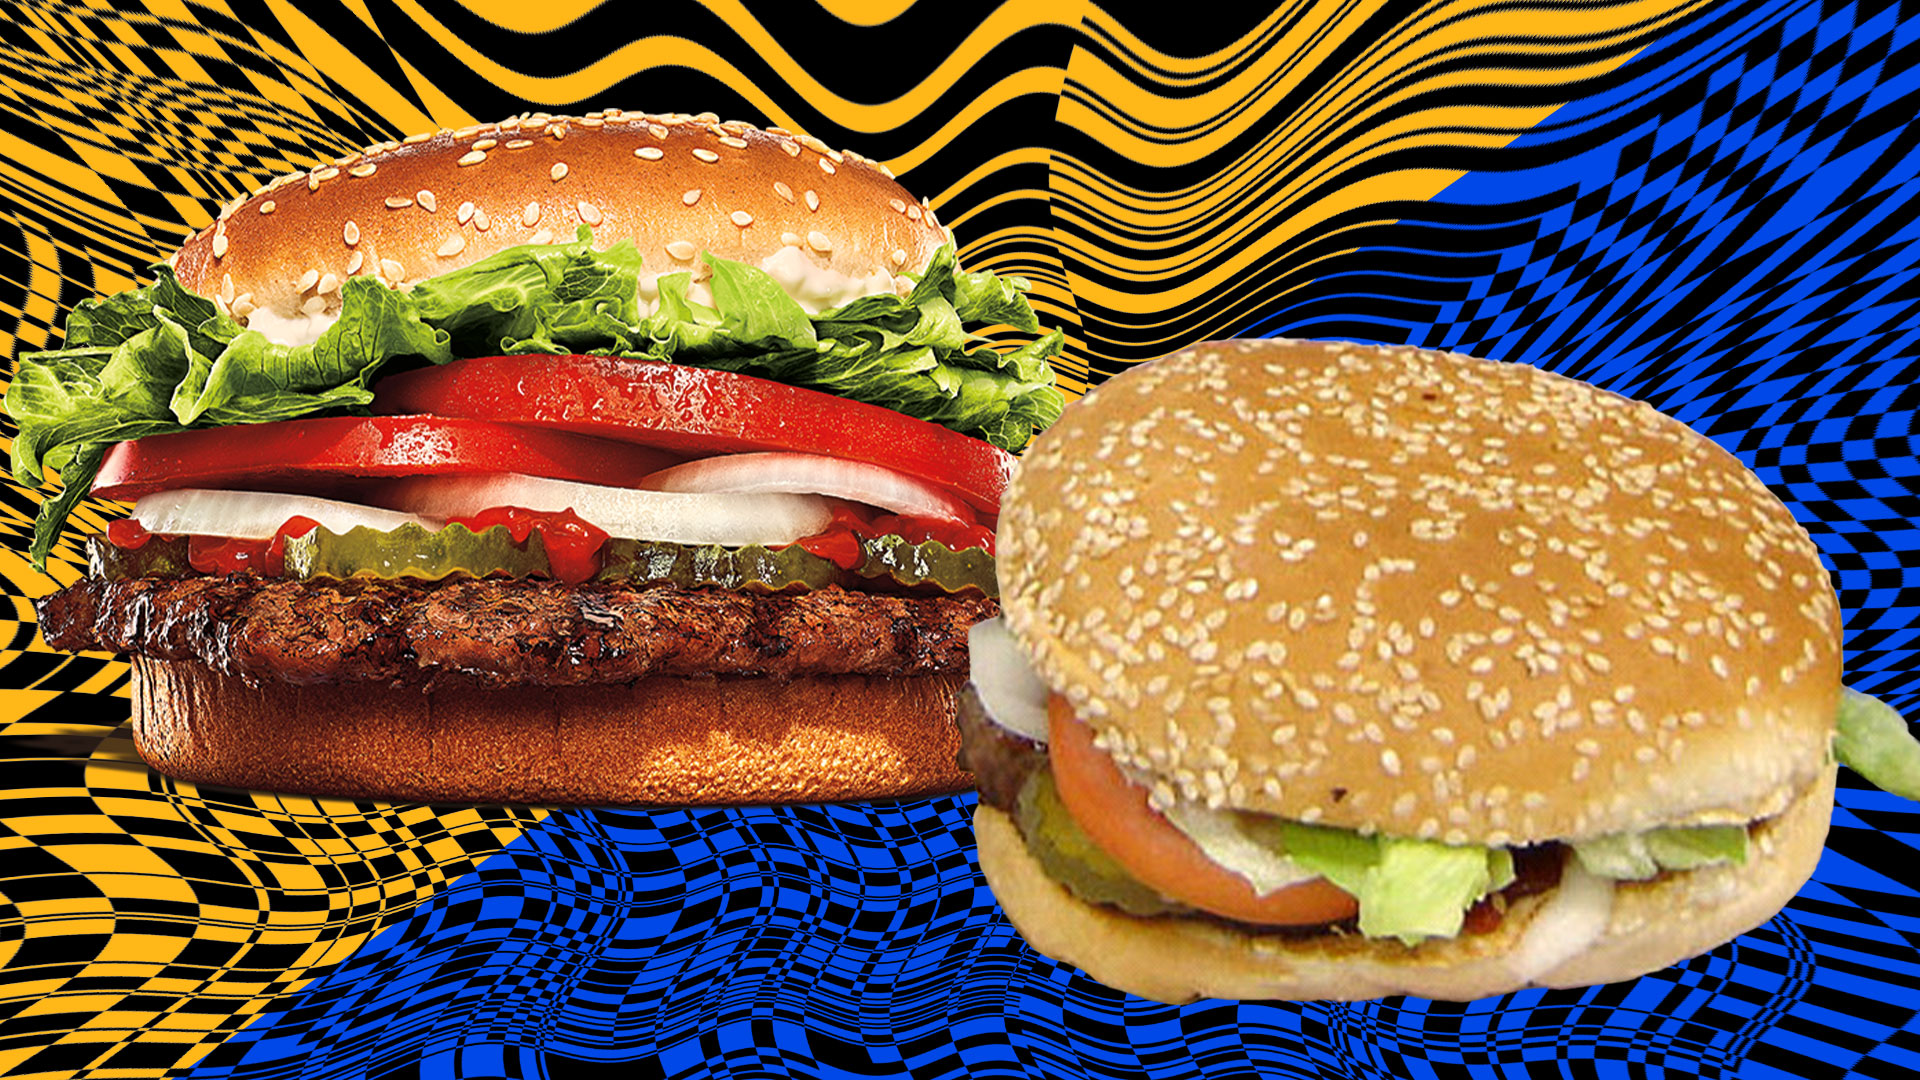 Burger King Whopper lawsuit says menu boards mislead on portion sizes